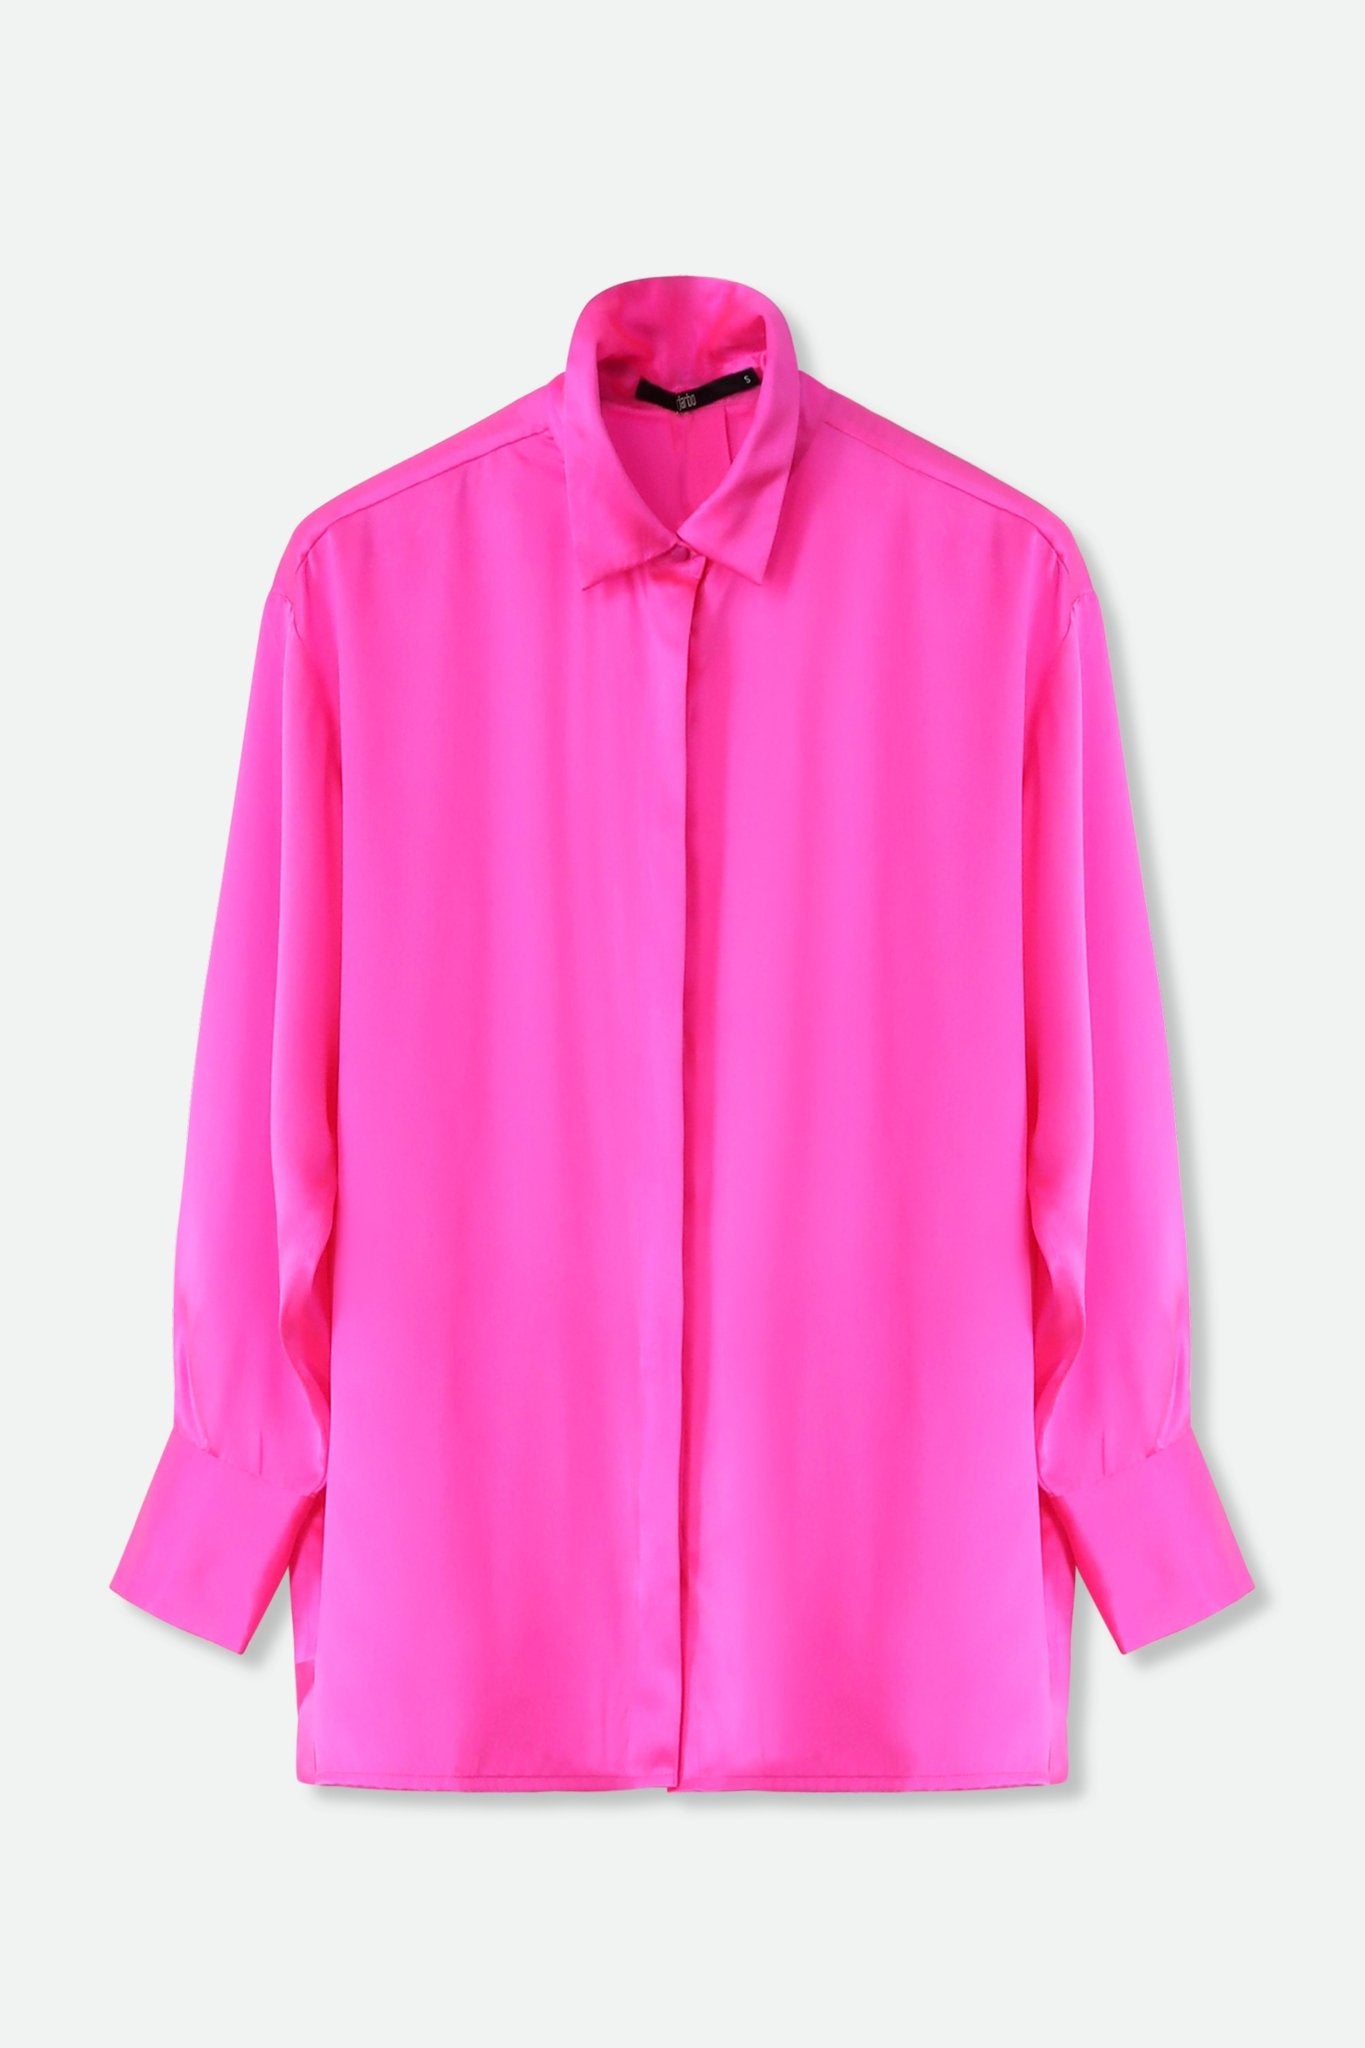 ADRIA SHIRT IN STRETCH SILK CHARMEUSE, HOT PINK - Jarbo